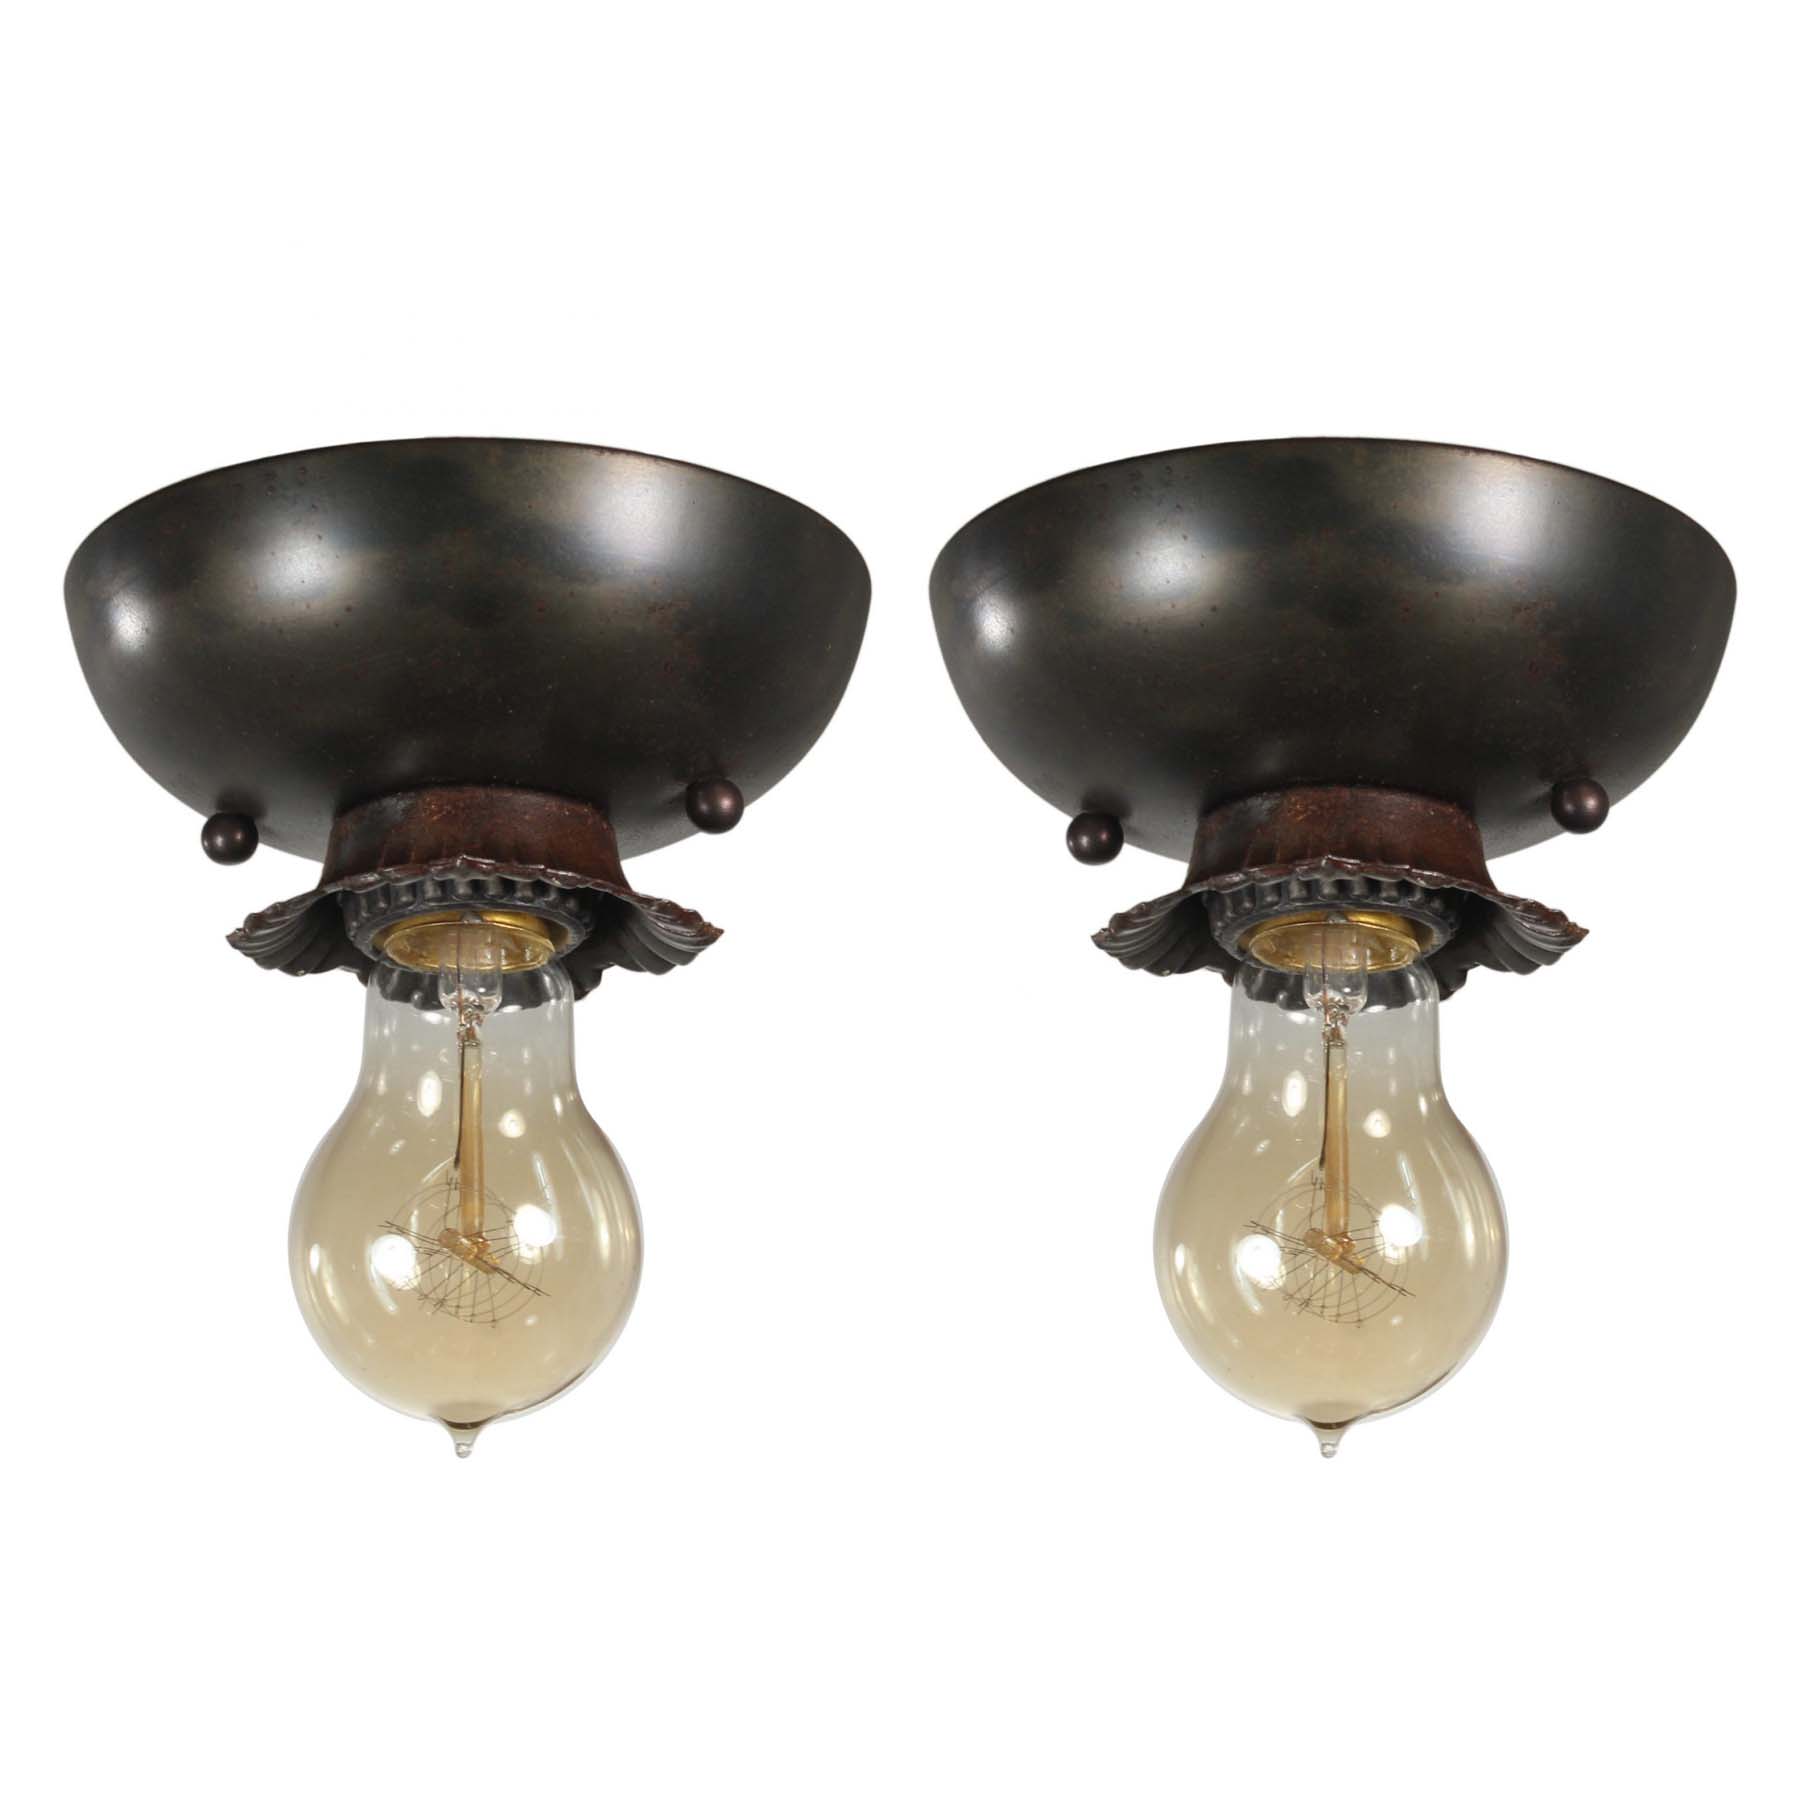 SOLD Flush-Mount Lights with Exposed Bulbs, Antique Lighting-0